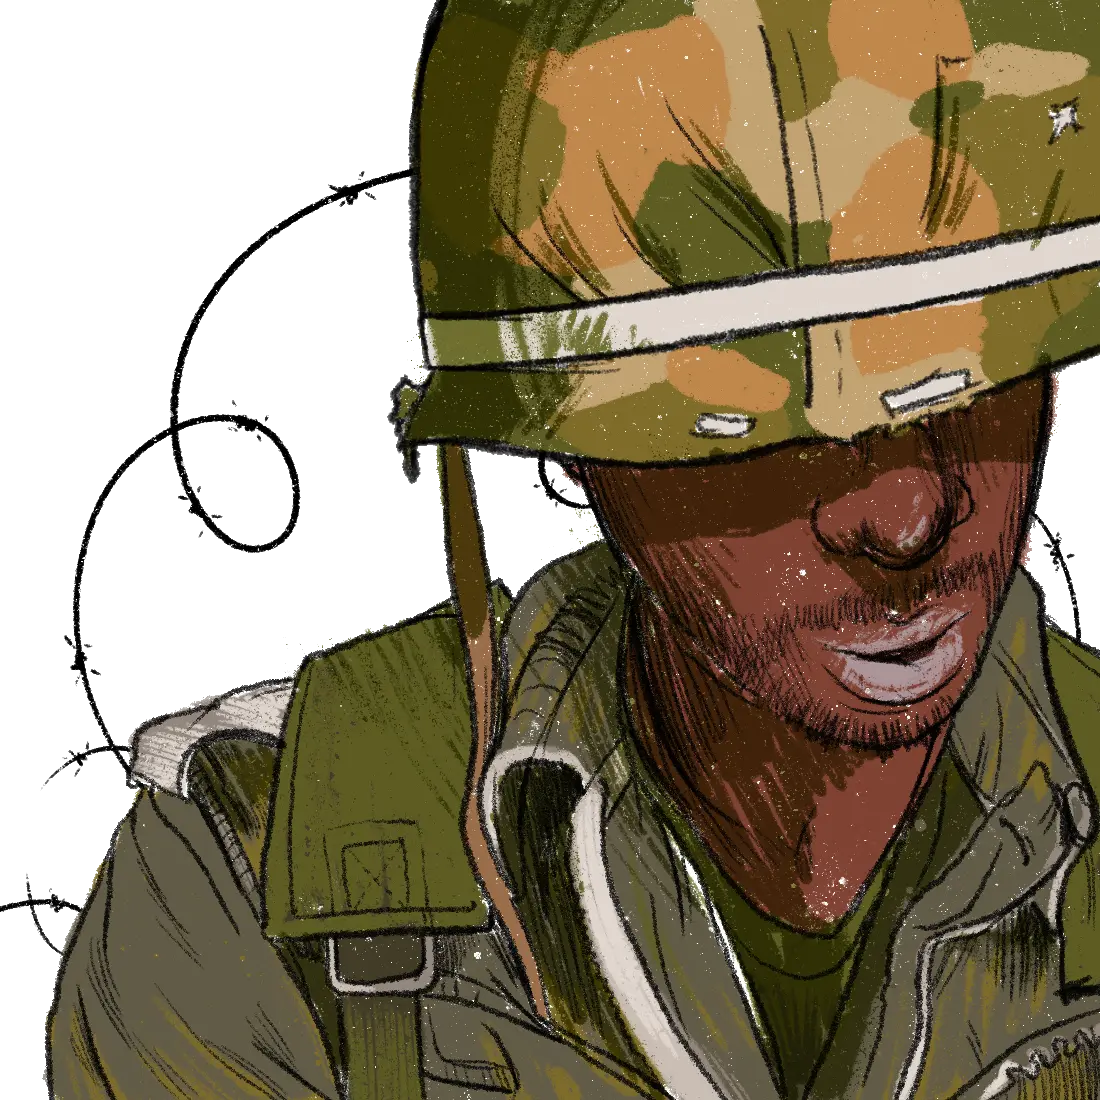 An illustration of a soldier